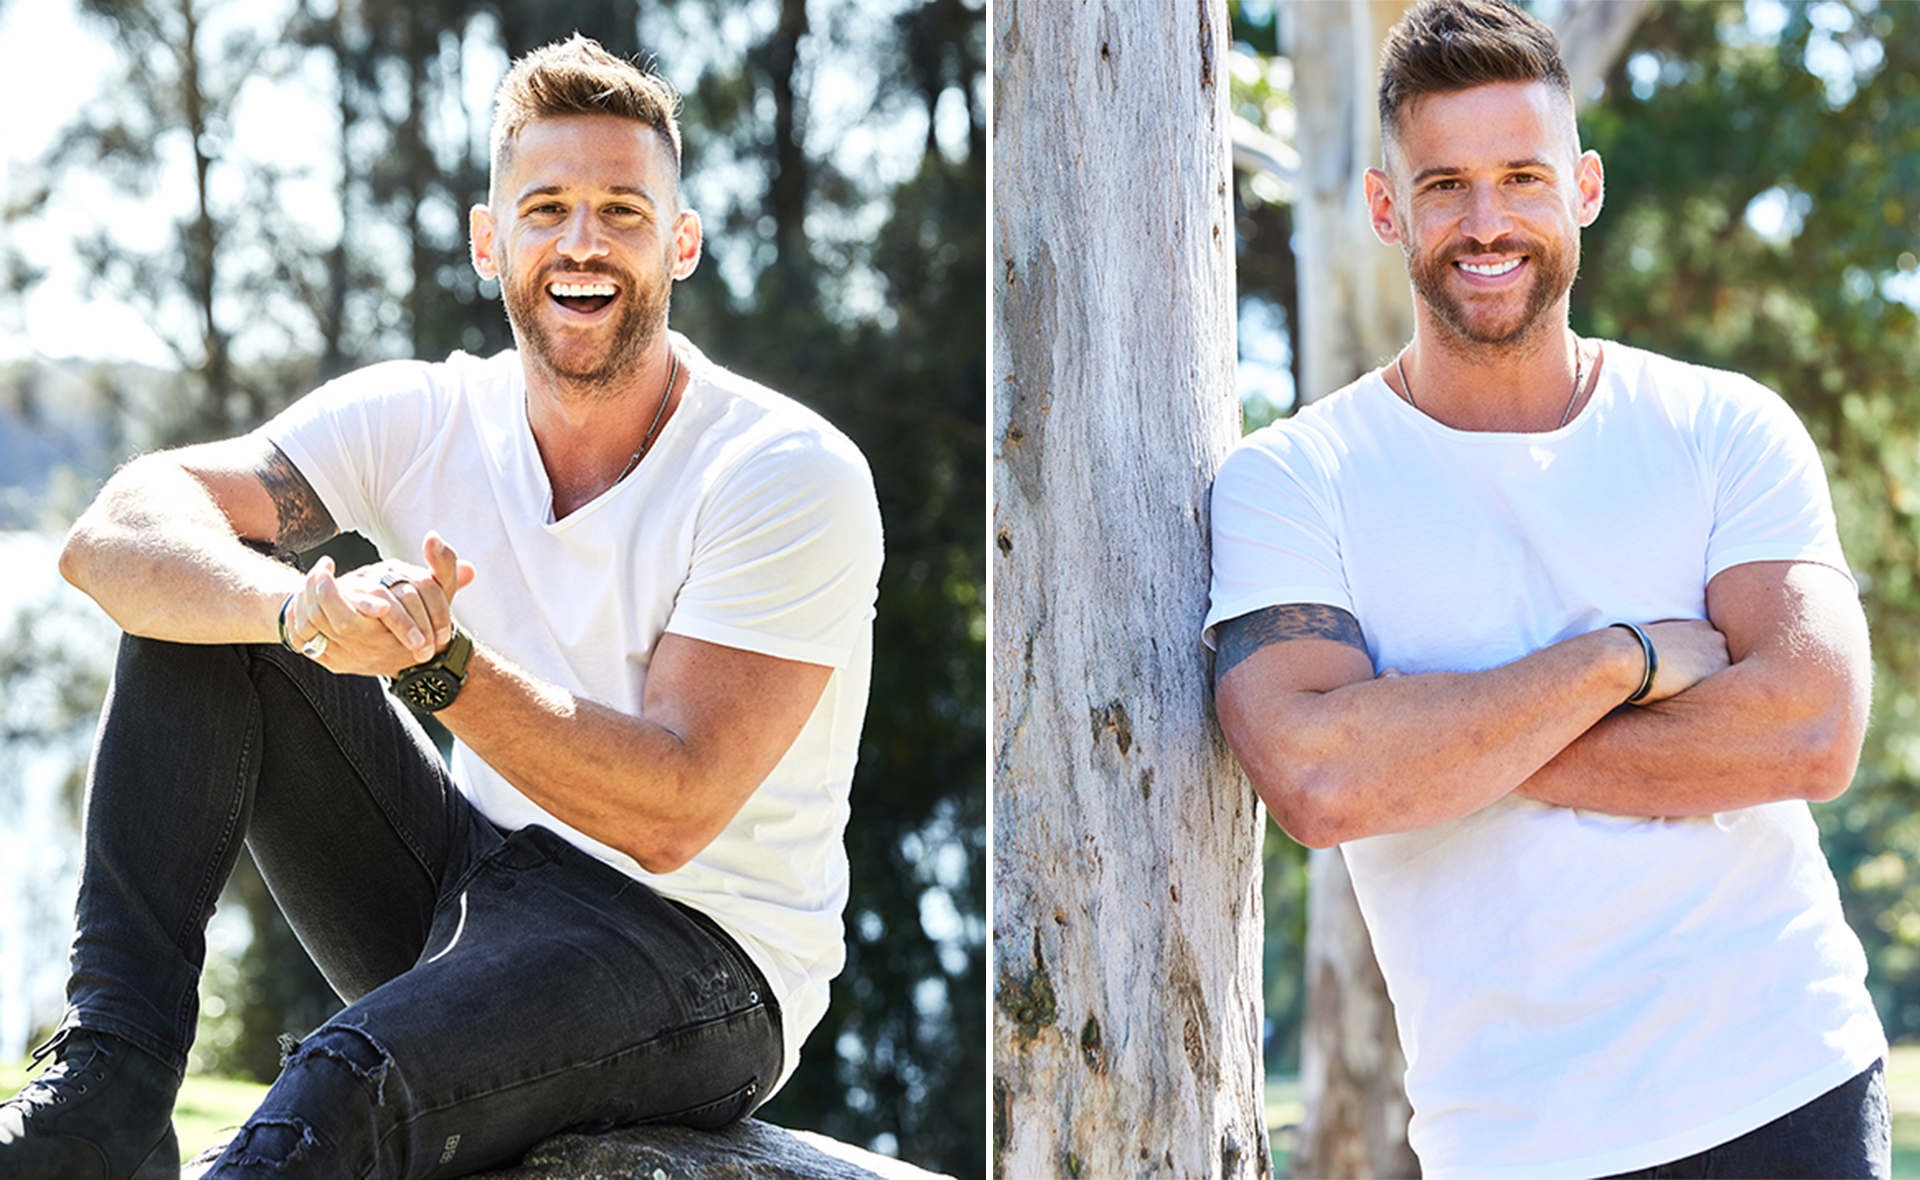 EXCLUSIVE: “I’m a different person now”: How meditation changed Dan Ewing’s life and brought him closer to his son